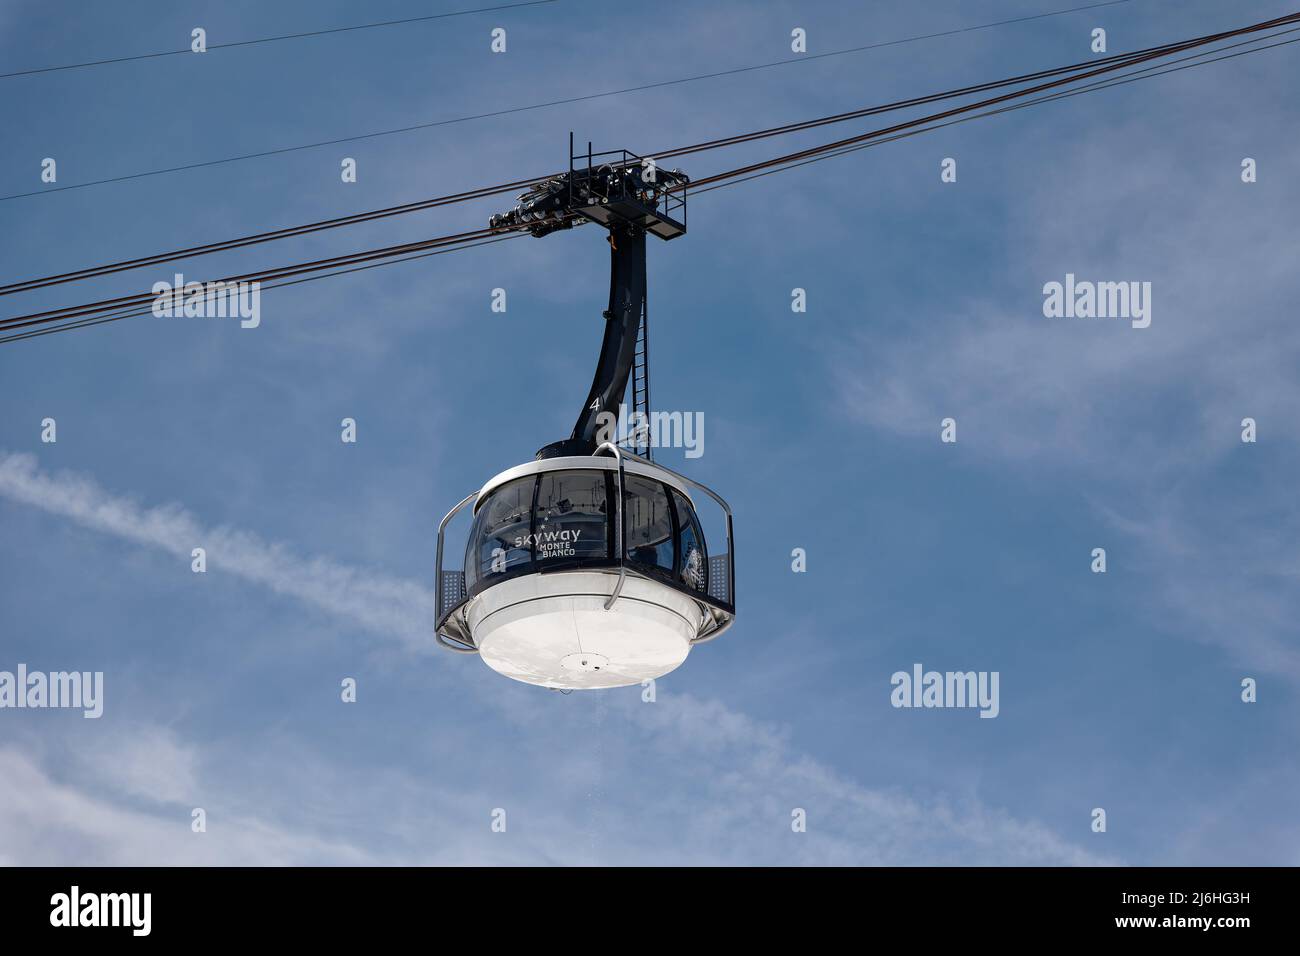 A Skyway Monte Bianco cable car’s gondola seen from bottom. Stock Photo